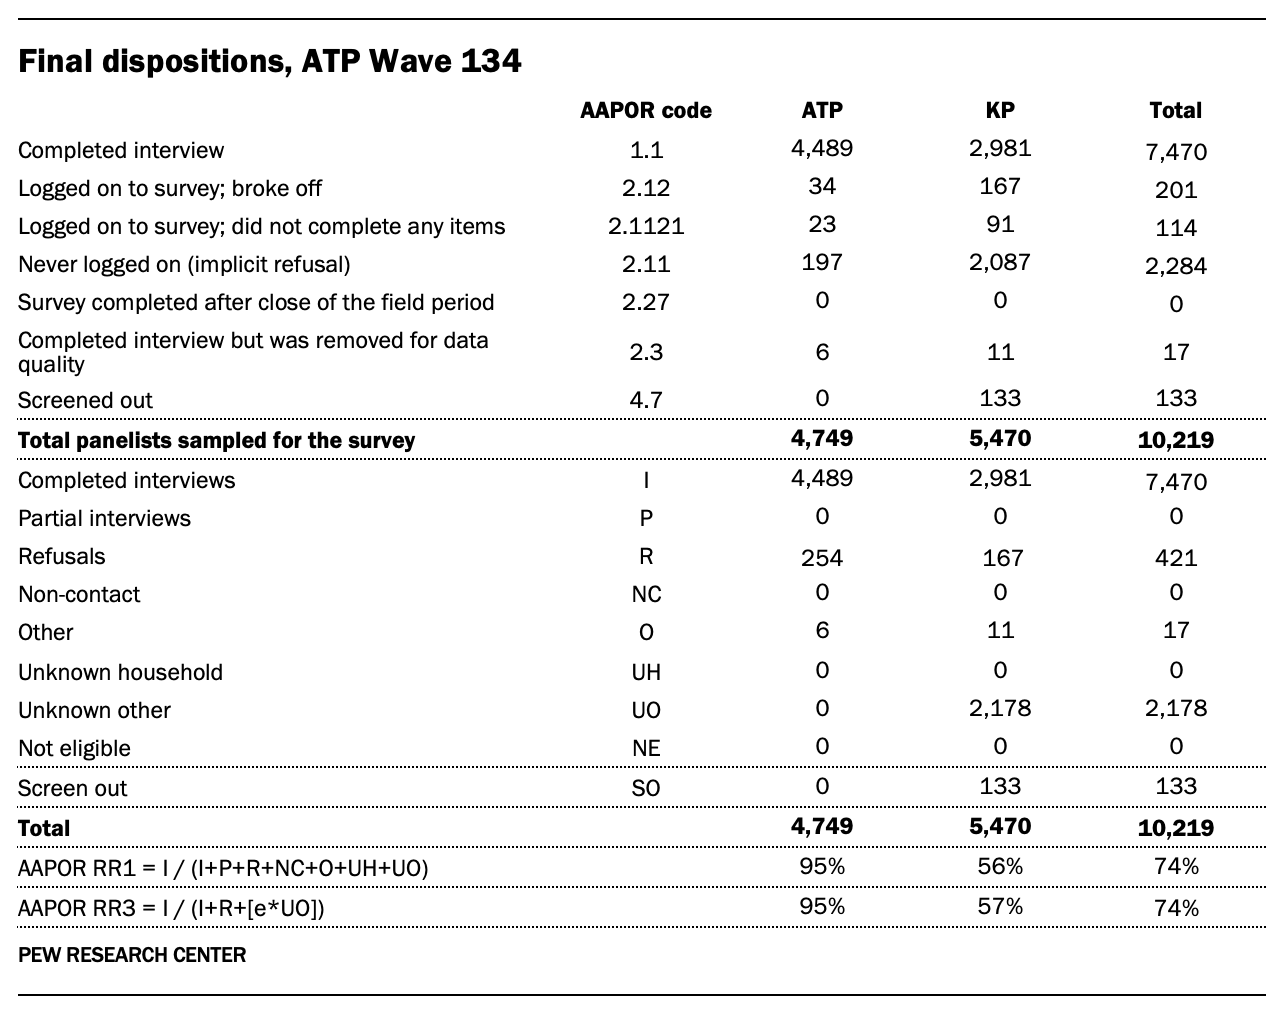 A table showing Final dispositions, ATP Wave 134